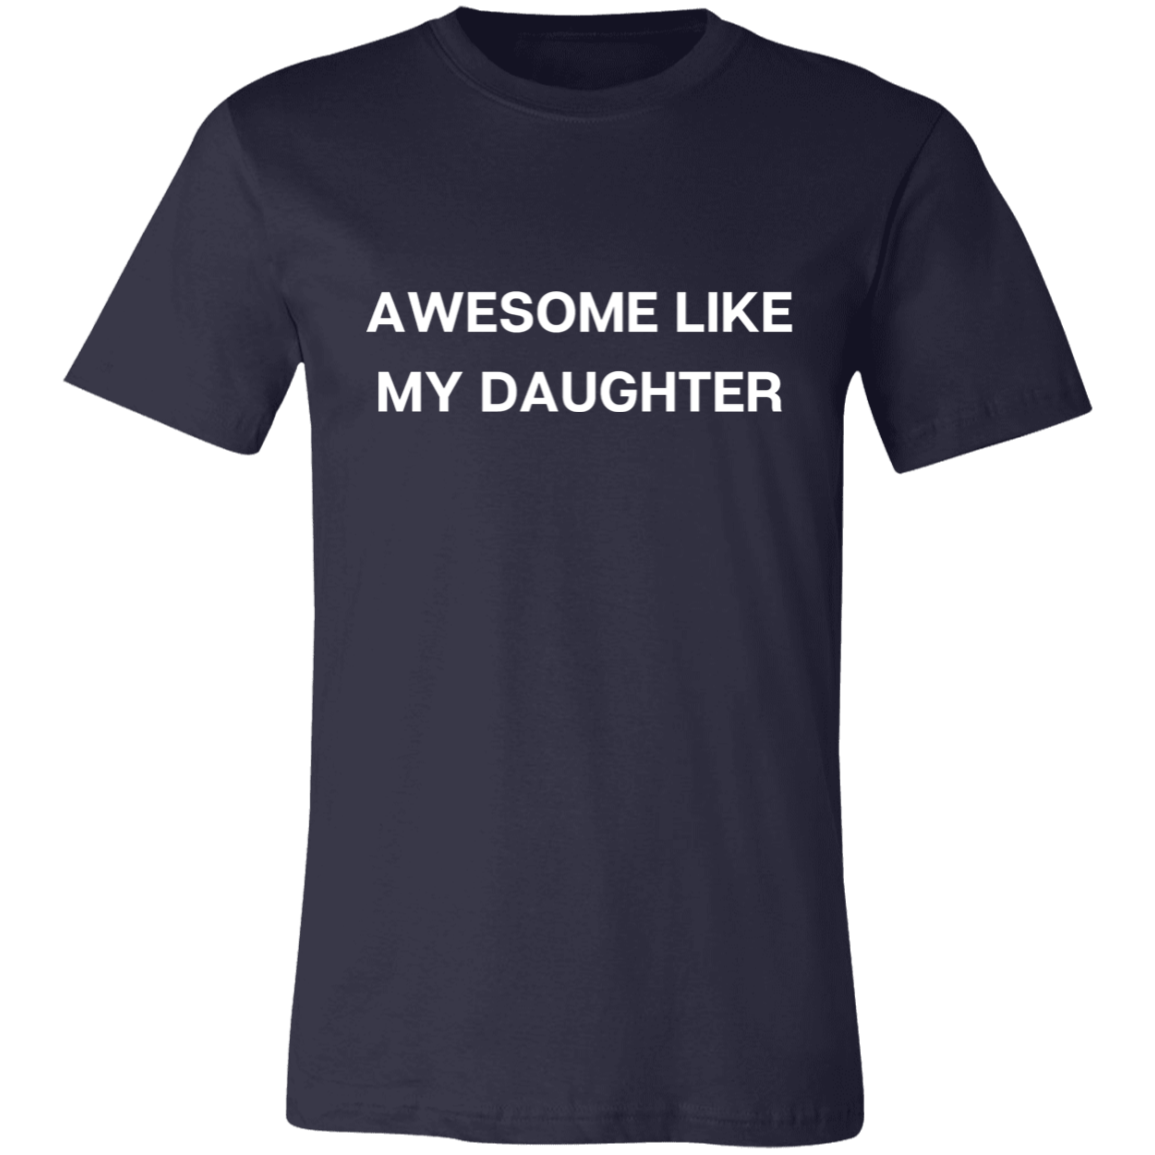 Awesome Like My Daughter (I) Short-Sleeve T-Shirt